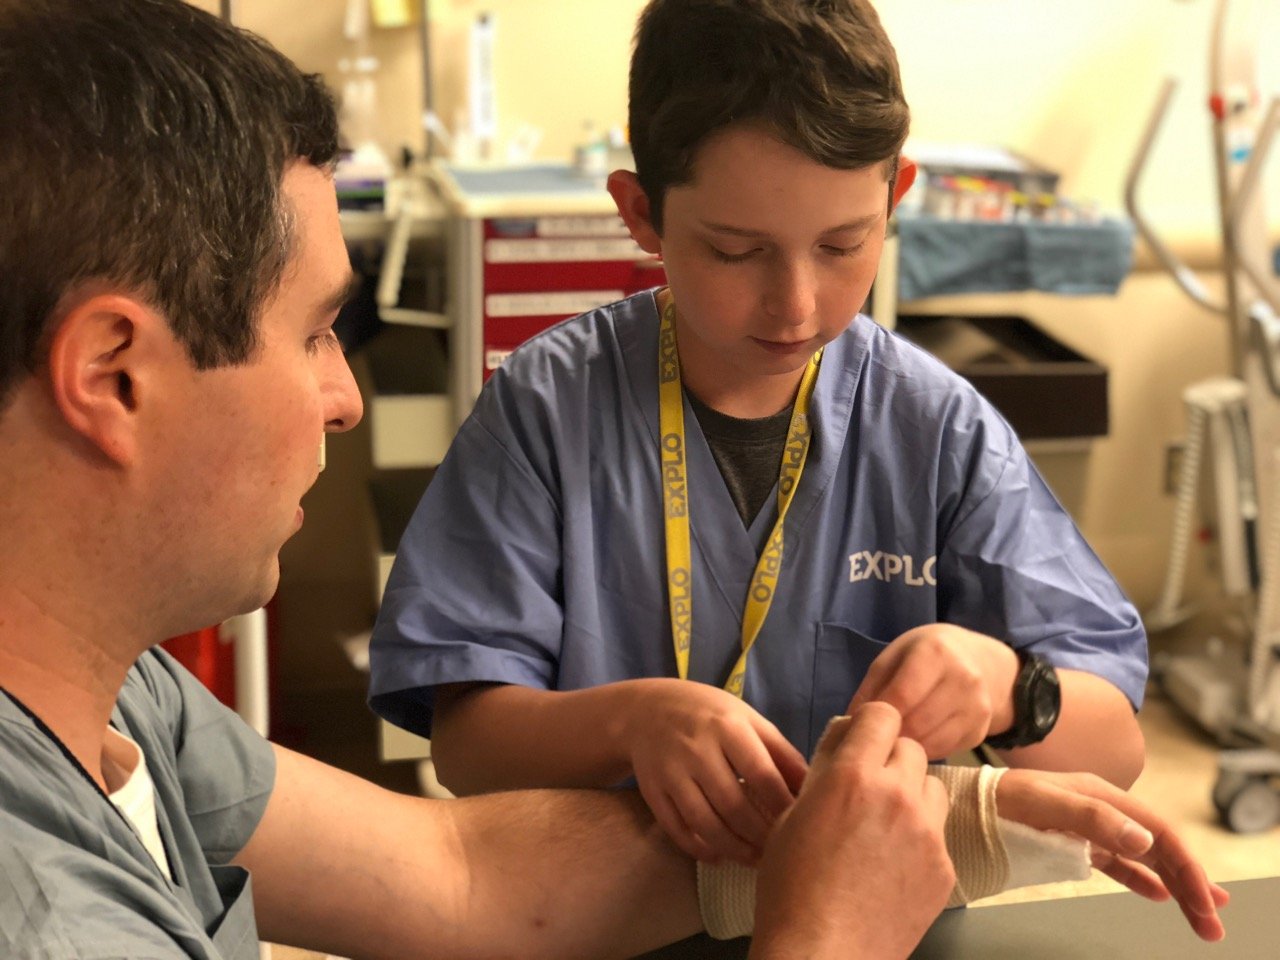 Dr. Eyre sits as a young male EXPLO ER student wraps his wrist in an ACE bandage